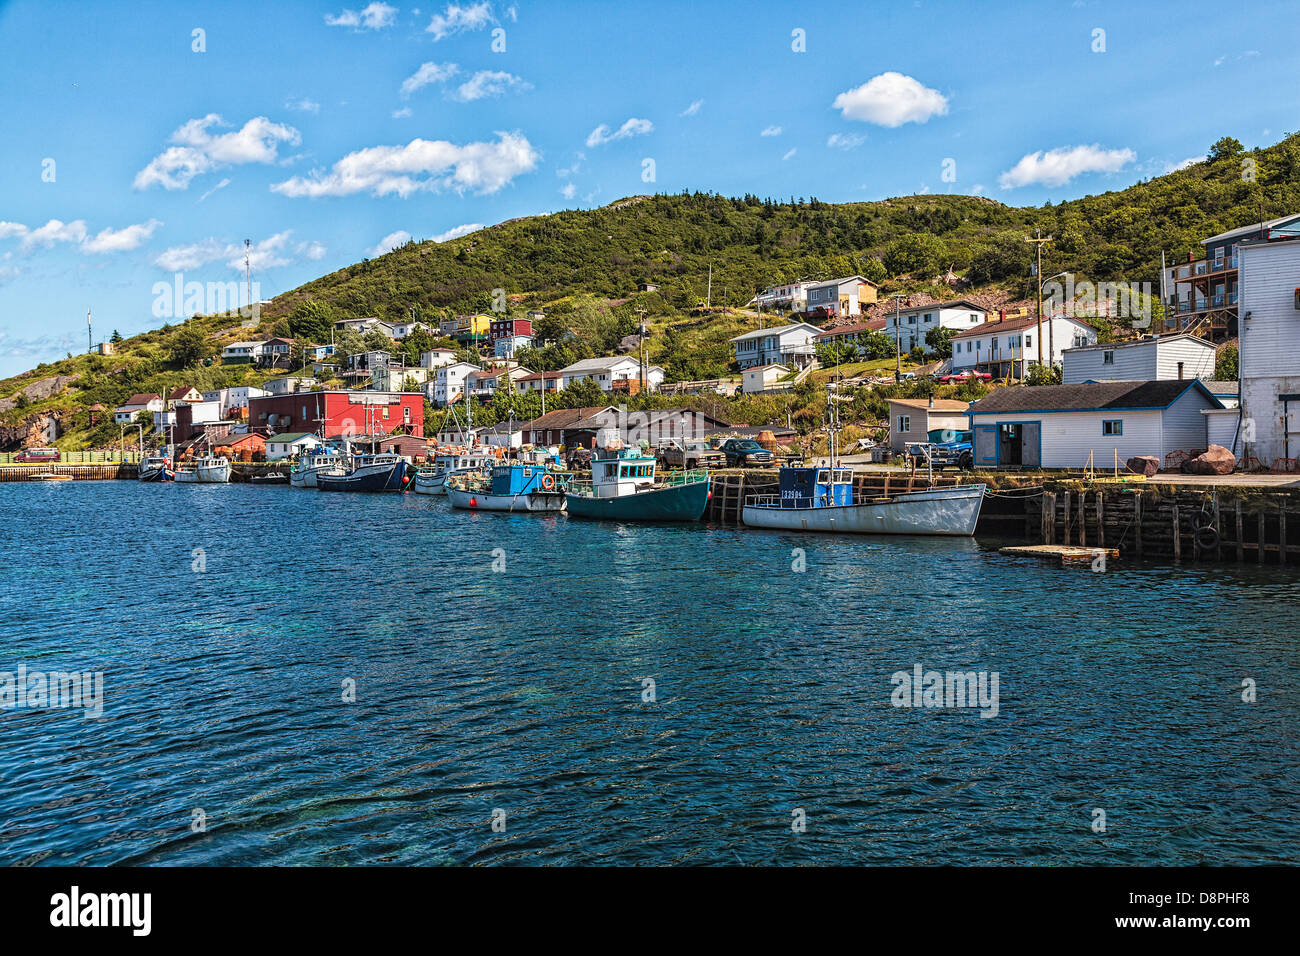 View of the Petty Harbour Wharf,  Newfoundland, Canada Stock Photo